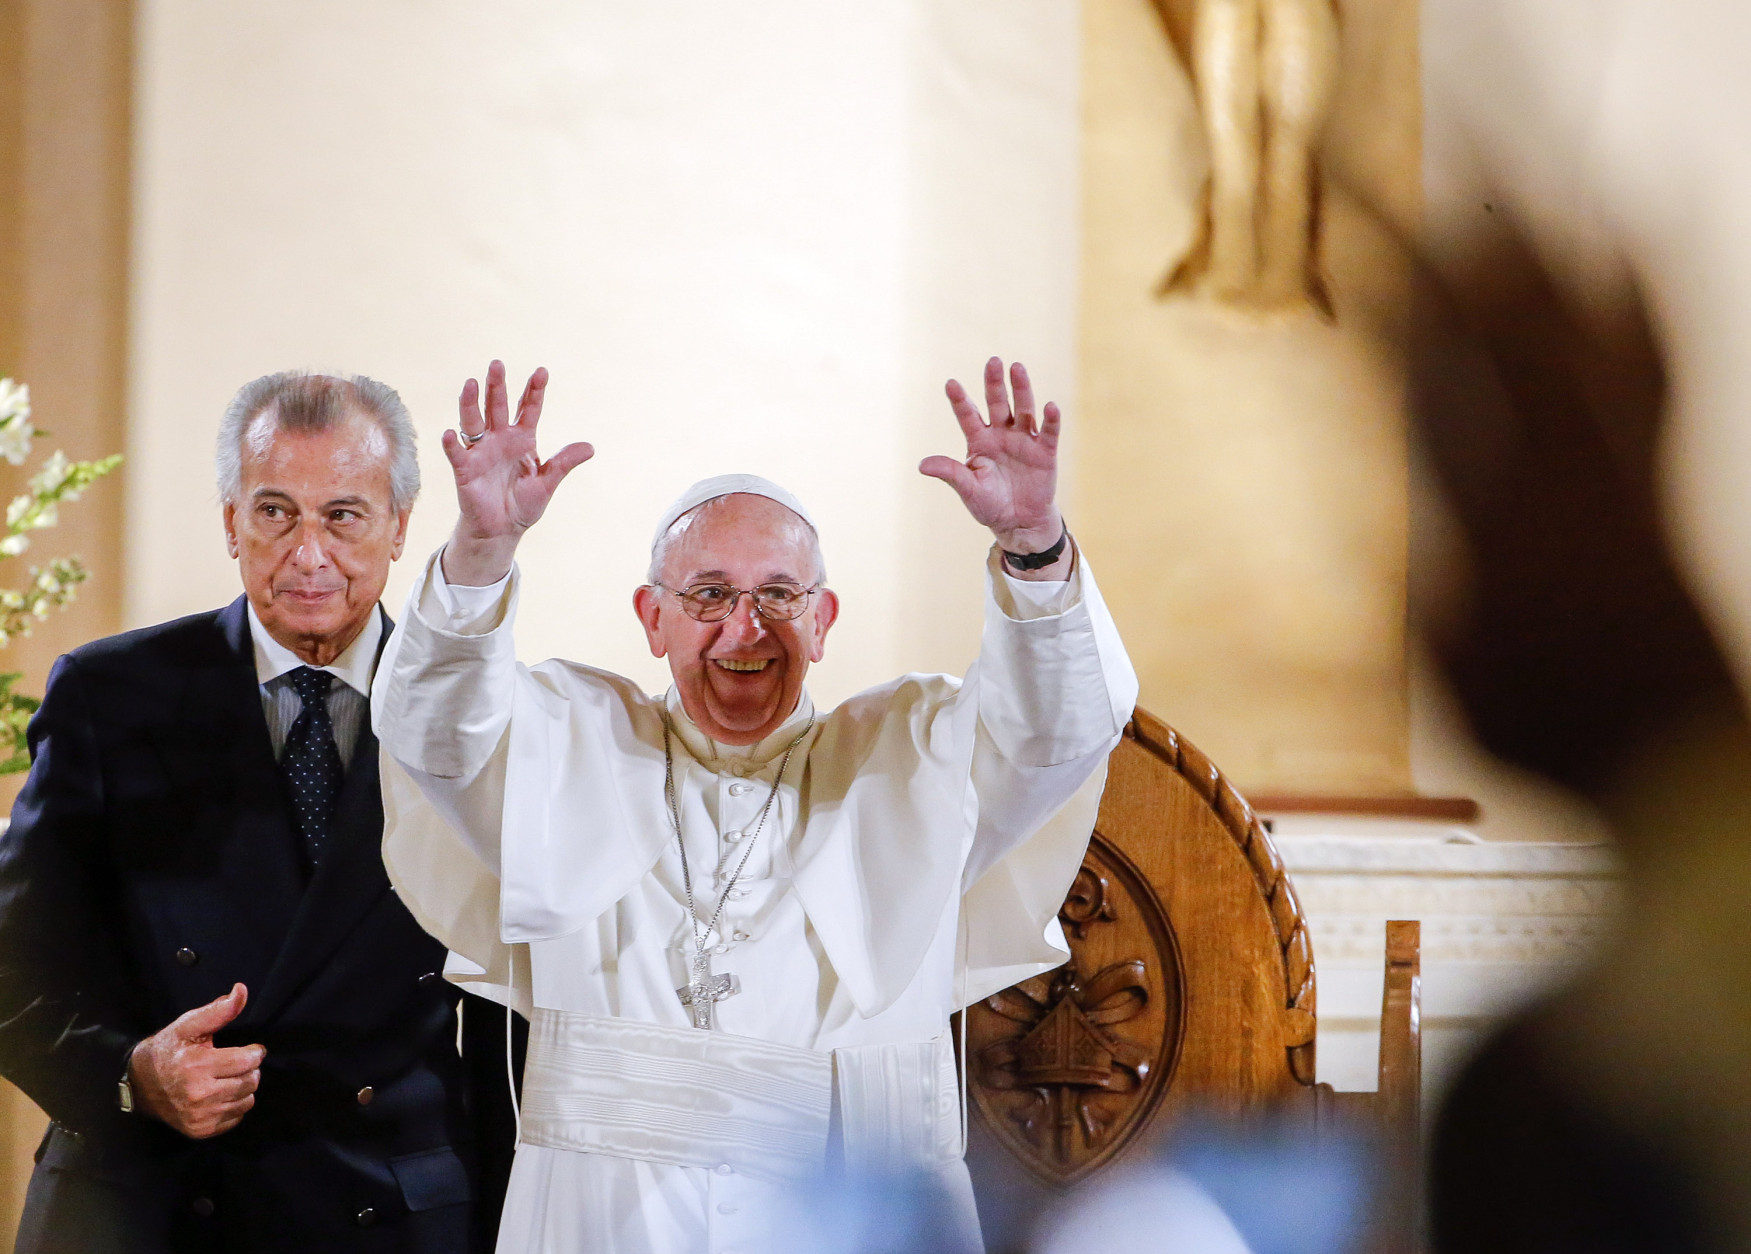 Pope Francis waves to the crowd after speaking at St. Patrick in the City Catholic church in Washington DC, USA, 24 September 2015. St. Patrick is the oldest Catholic church in Washington, founded in 1794. Pope Francis is on a five-day trip to the USA, which includes stops in Washington DC, New York and Philadelphia, after a three-day stay in Cuba.